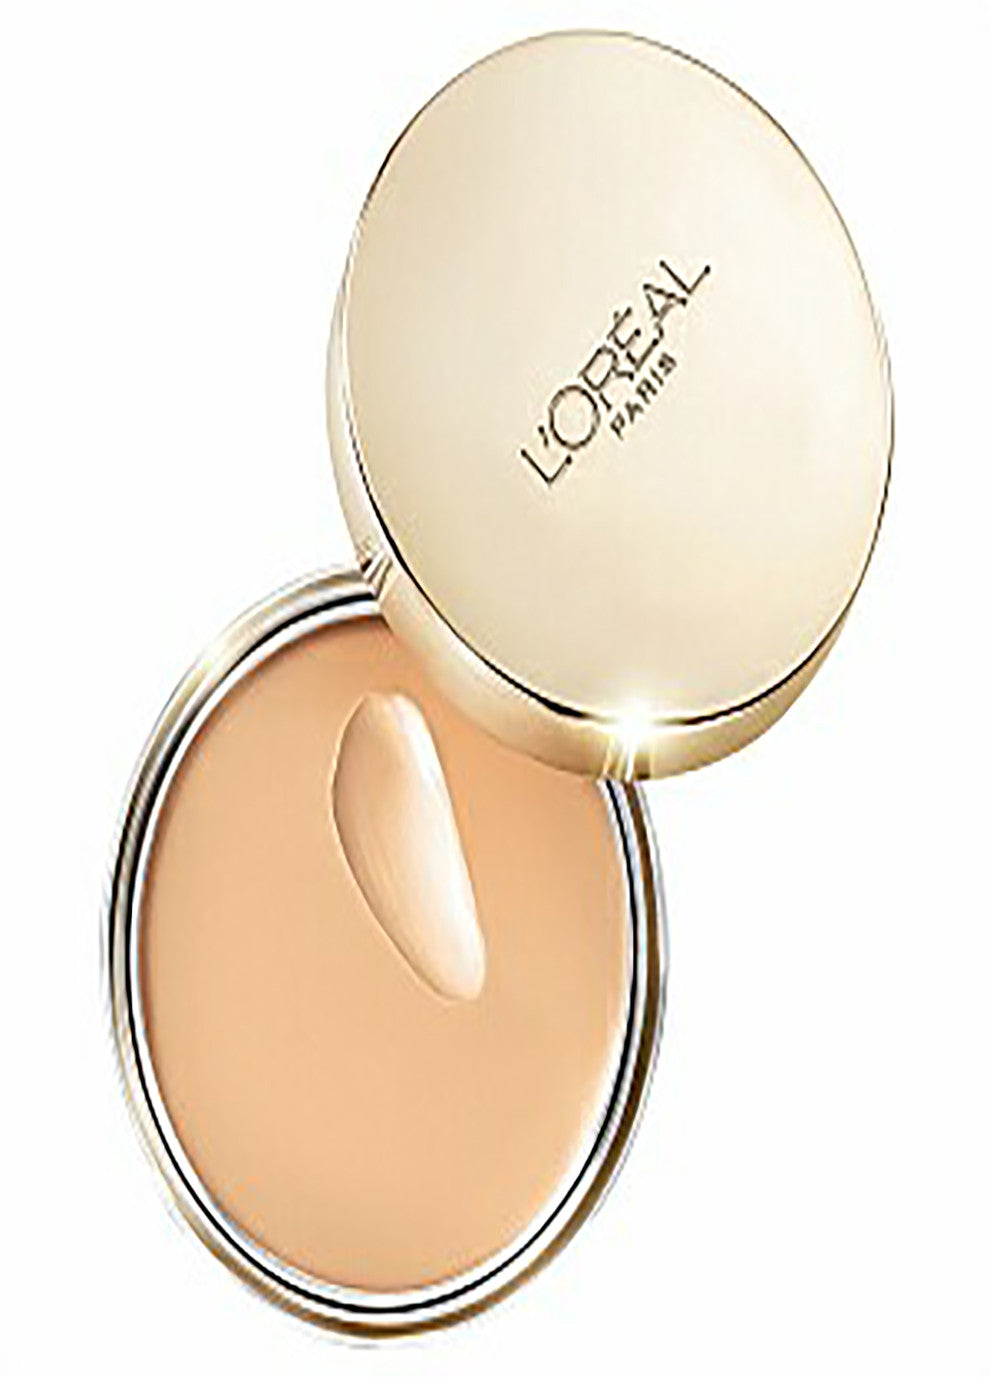 L'Oreal Visible Lift Repair Absolute Rapid Age Reversing SPF 16 Makeup #123 Classic Ivory